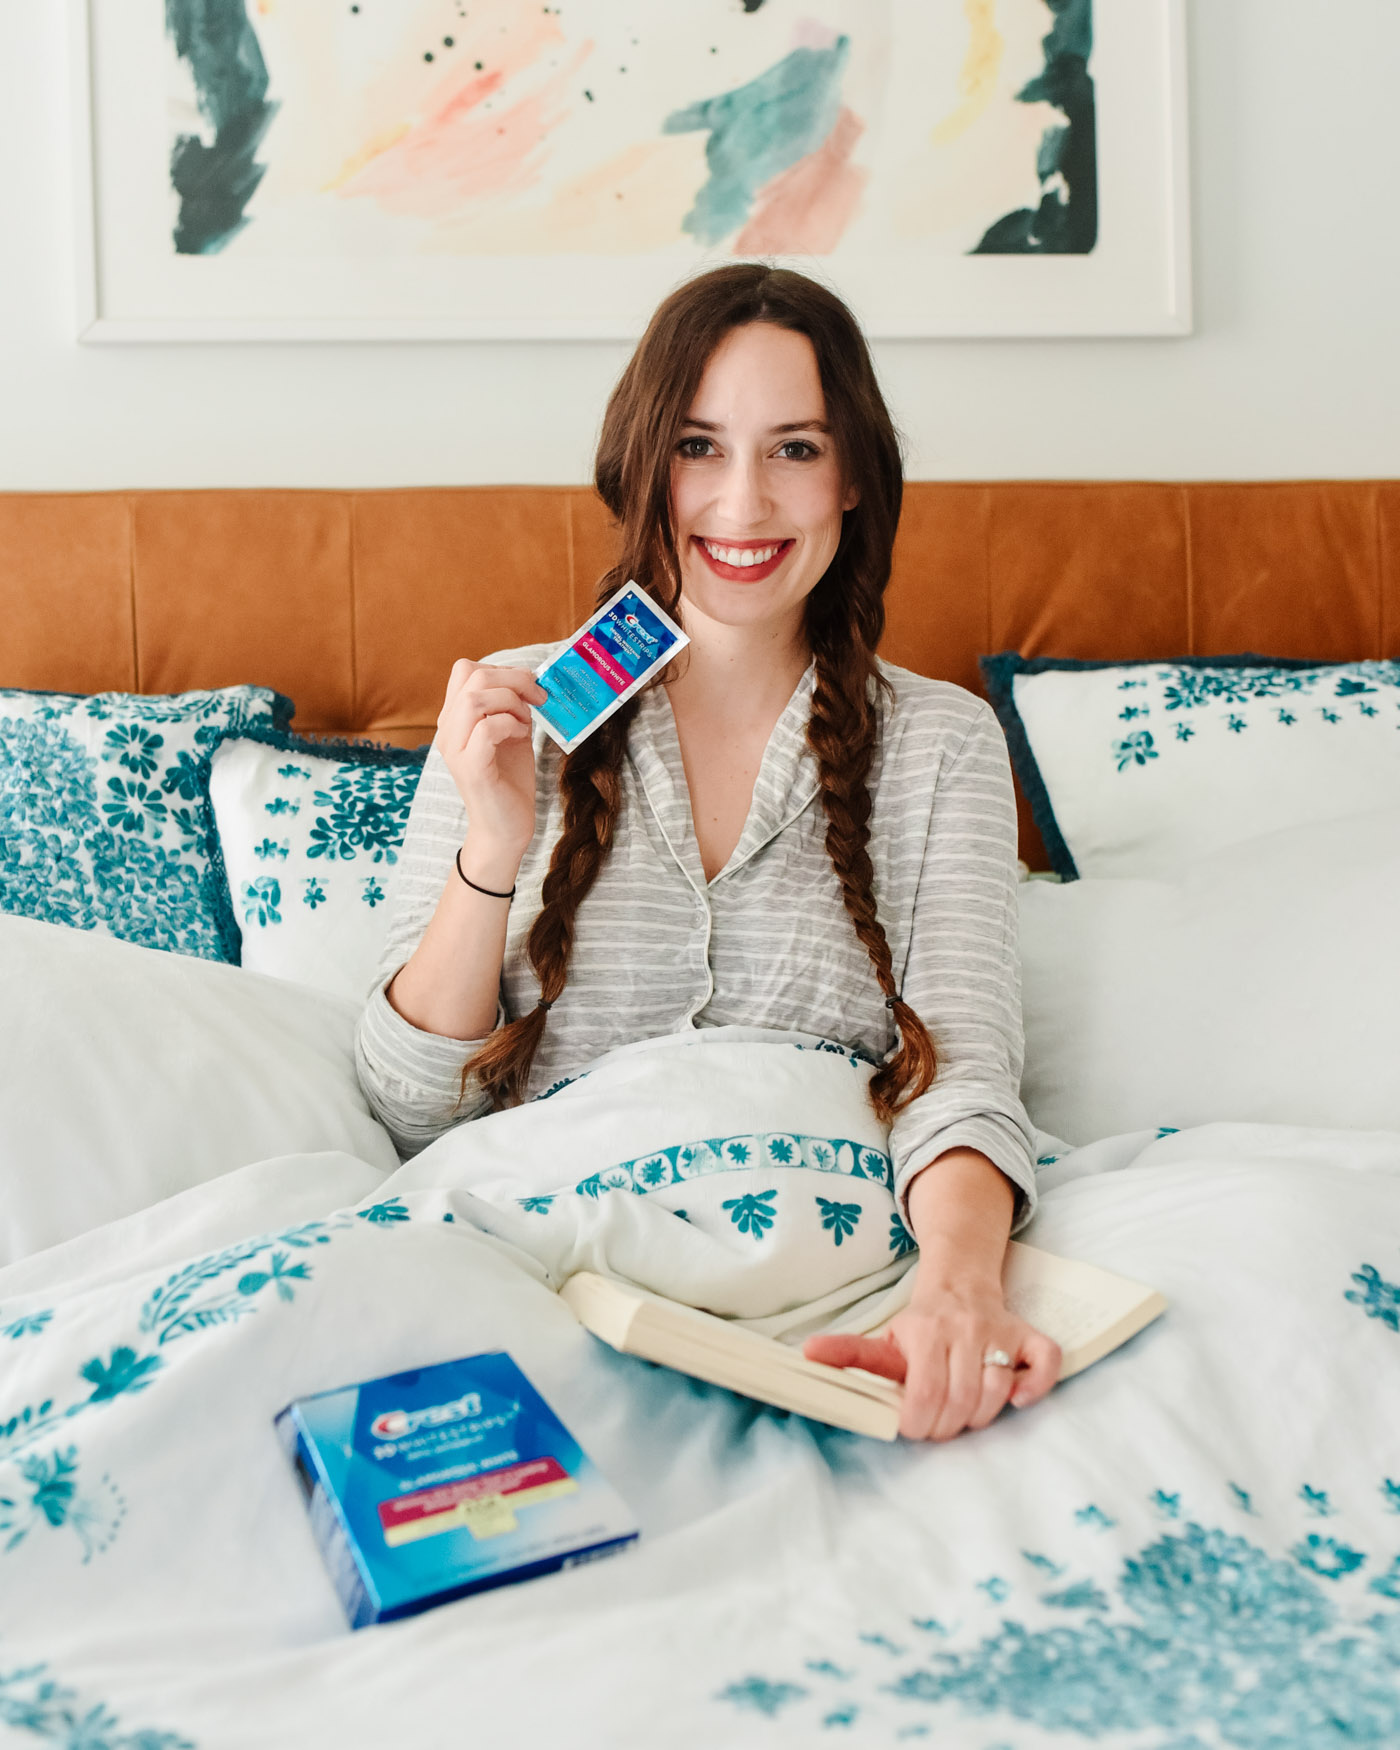 Crest 3D Whitestrips by popular Memphis lifestyle blog, Lone Star Looking Glass: image of a woman sitting in bed with a book in her lap and holding some Crest 3D Whitestrips. 